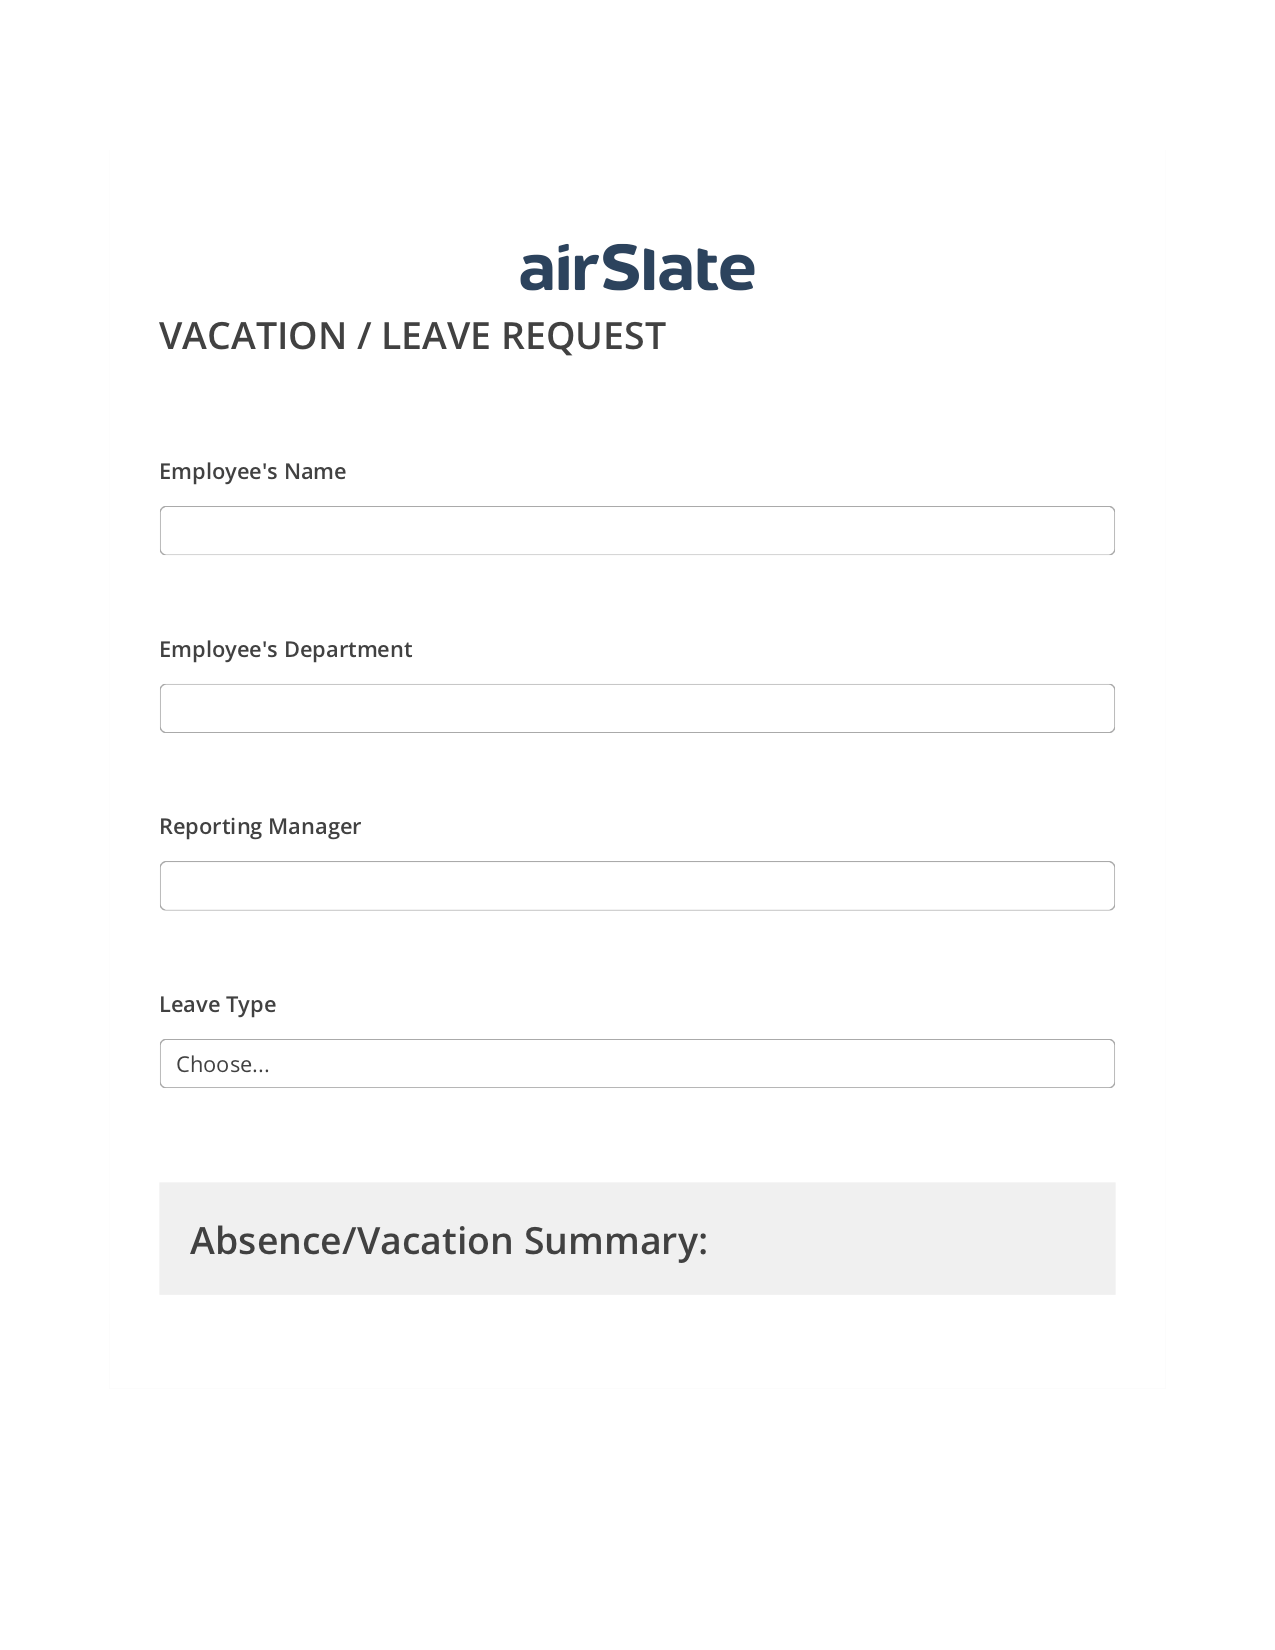 Vacation/Leave Request Workflow Pre-fill from another Slate Bot, Export to MS Dynamics 365 Bot, Export to WebMerge Bot